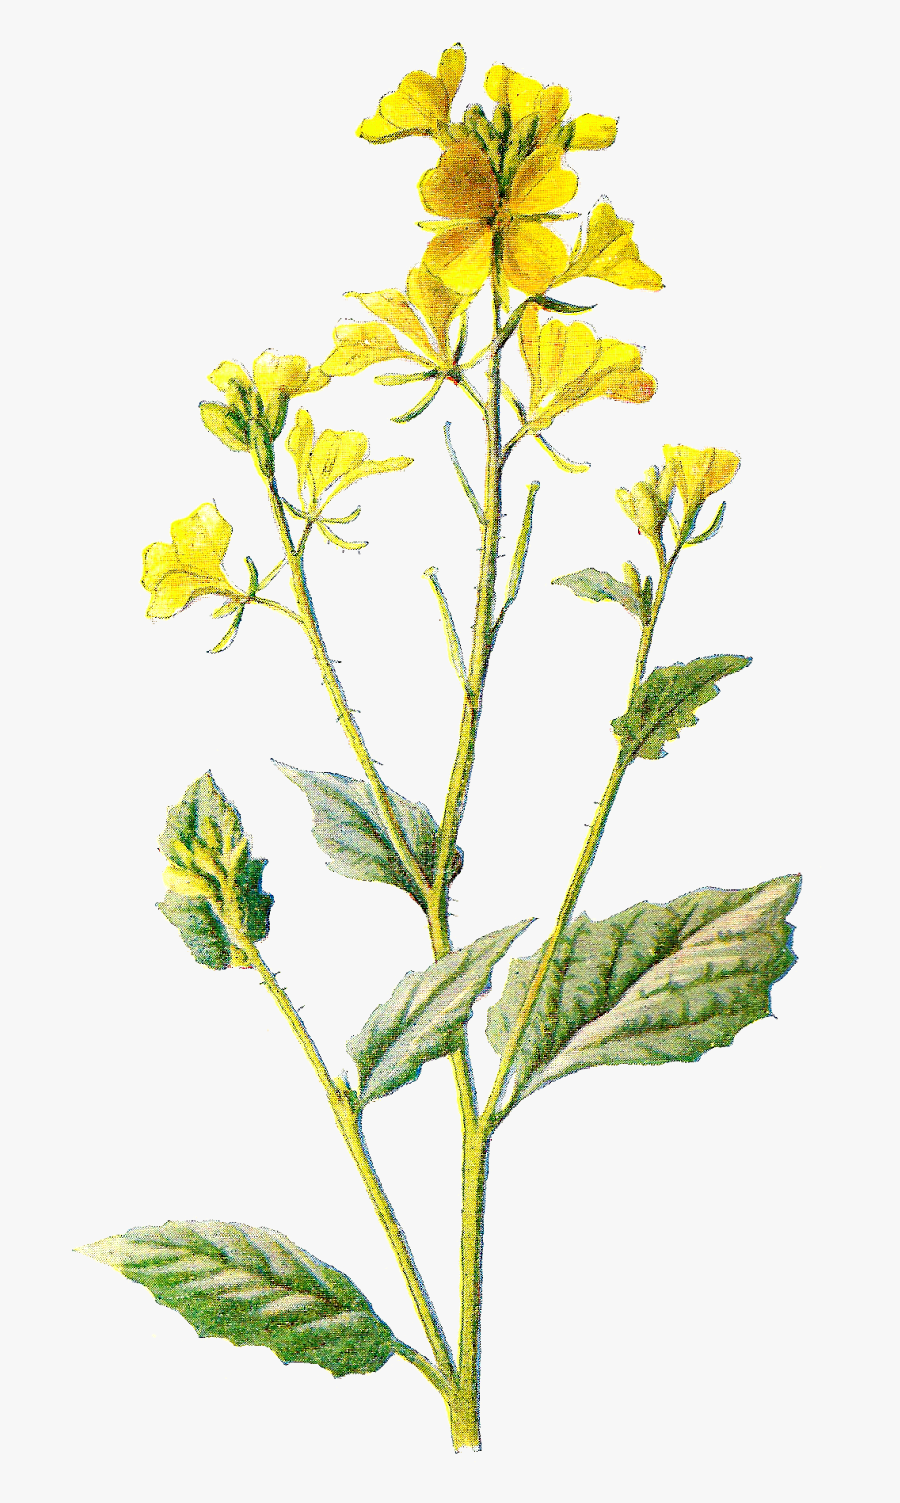 Digital Wildflower Downloads - Yellow Flowers Drawings Transparent, Transparent Clipart